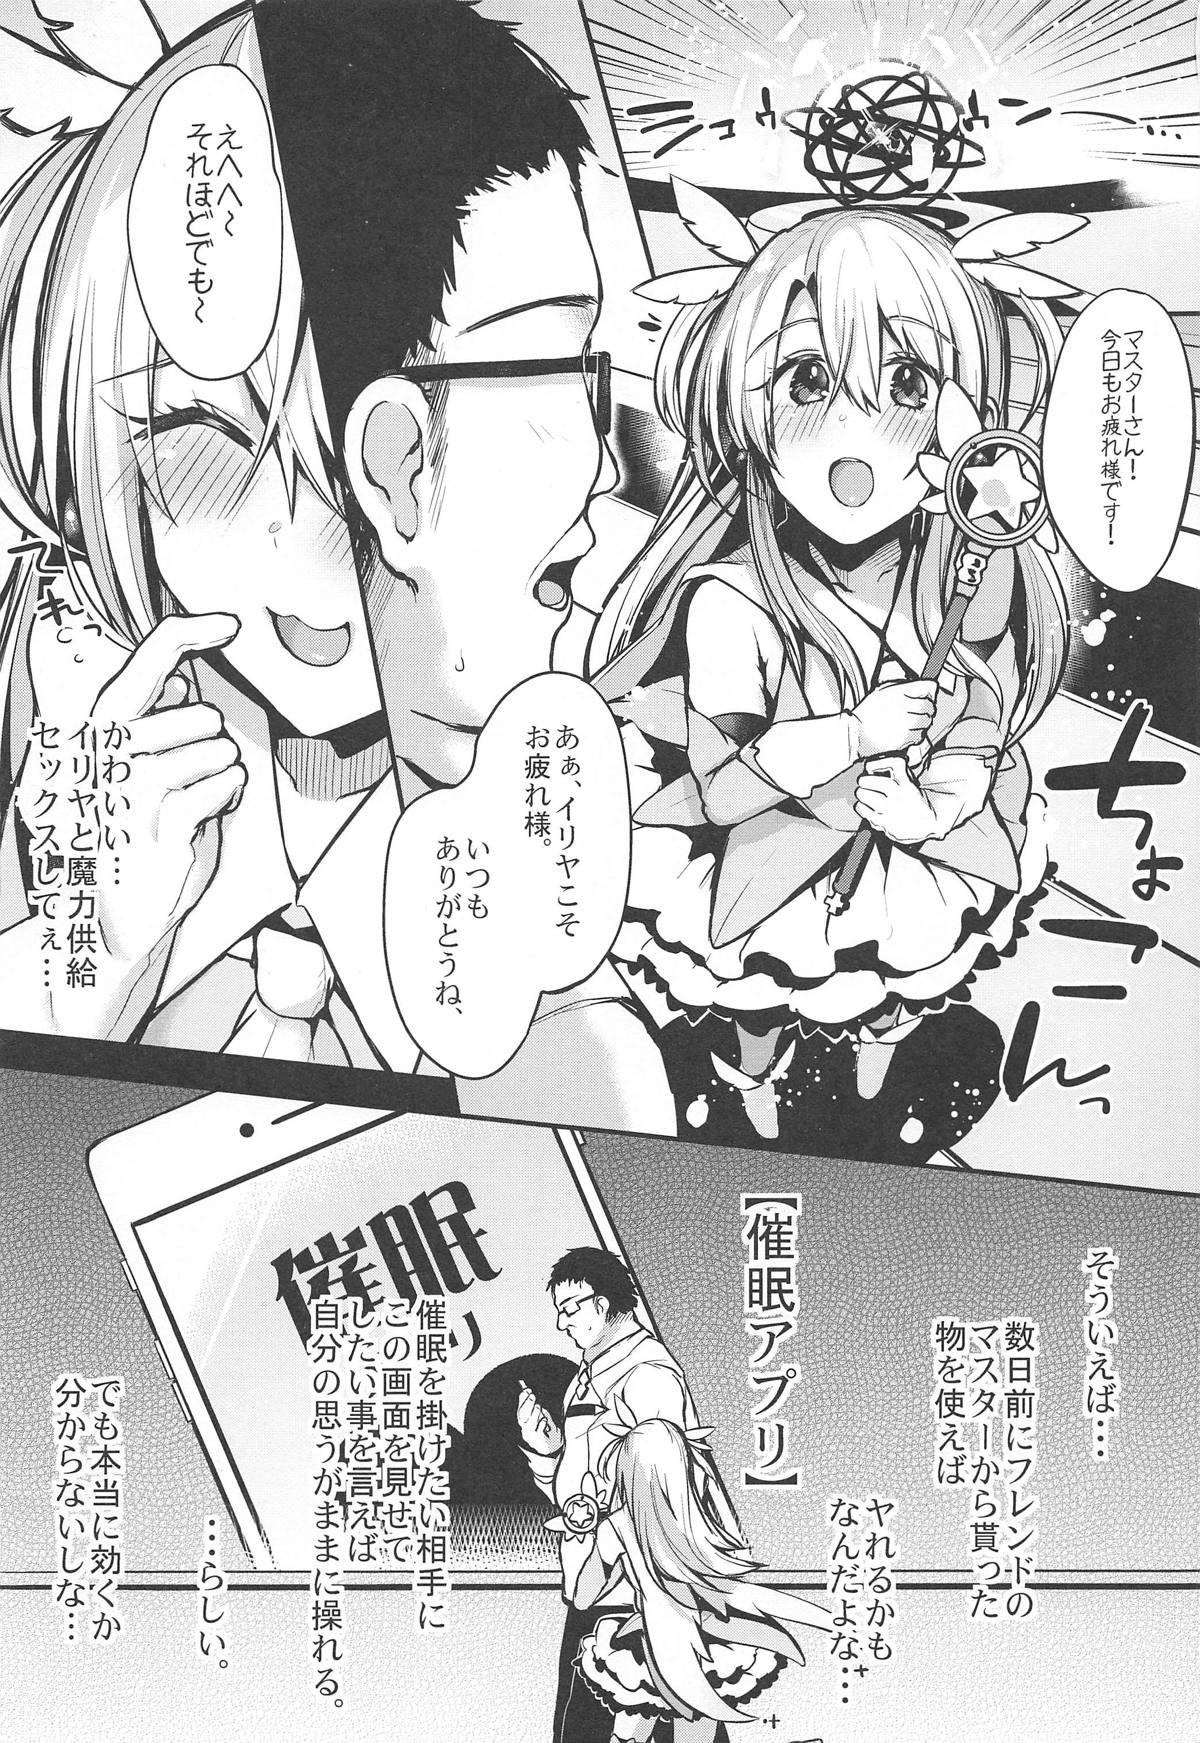 Best Nandemo Illya - Fate grand order Fate kaleid liner prisma illya Three Some - Page 2